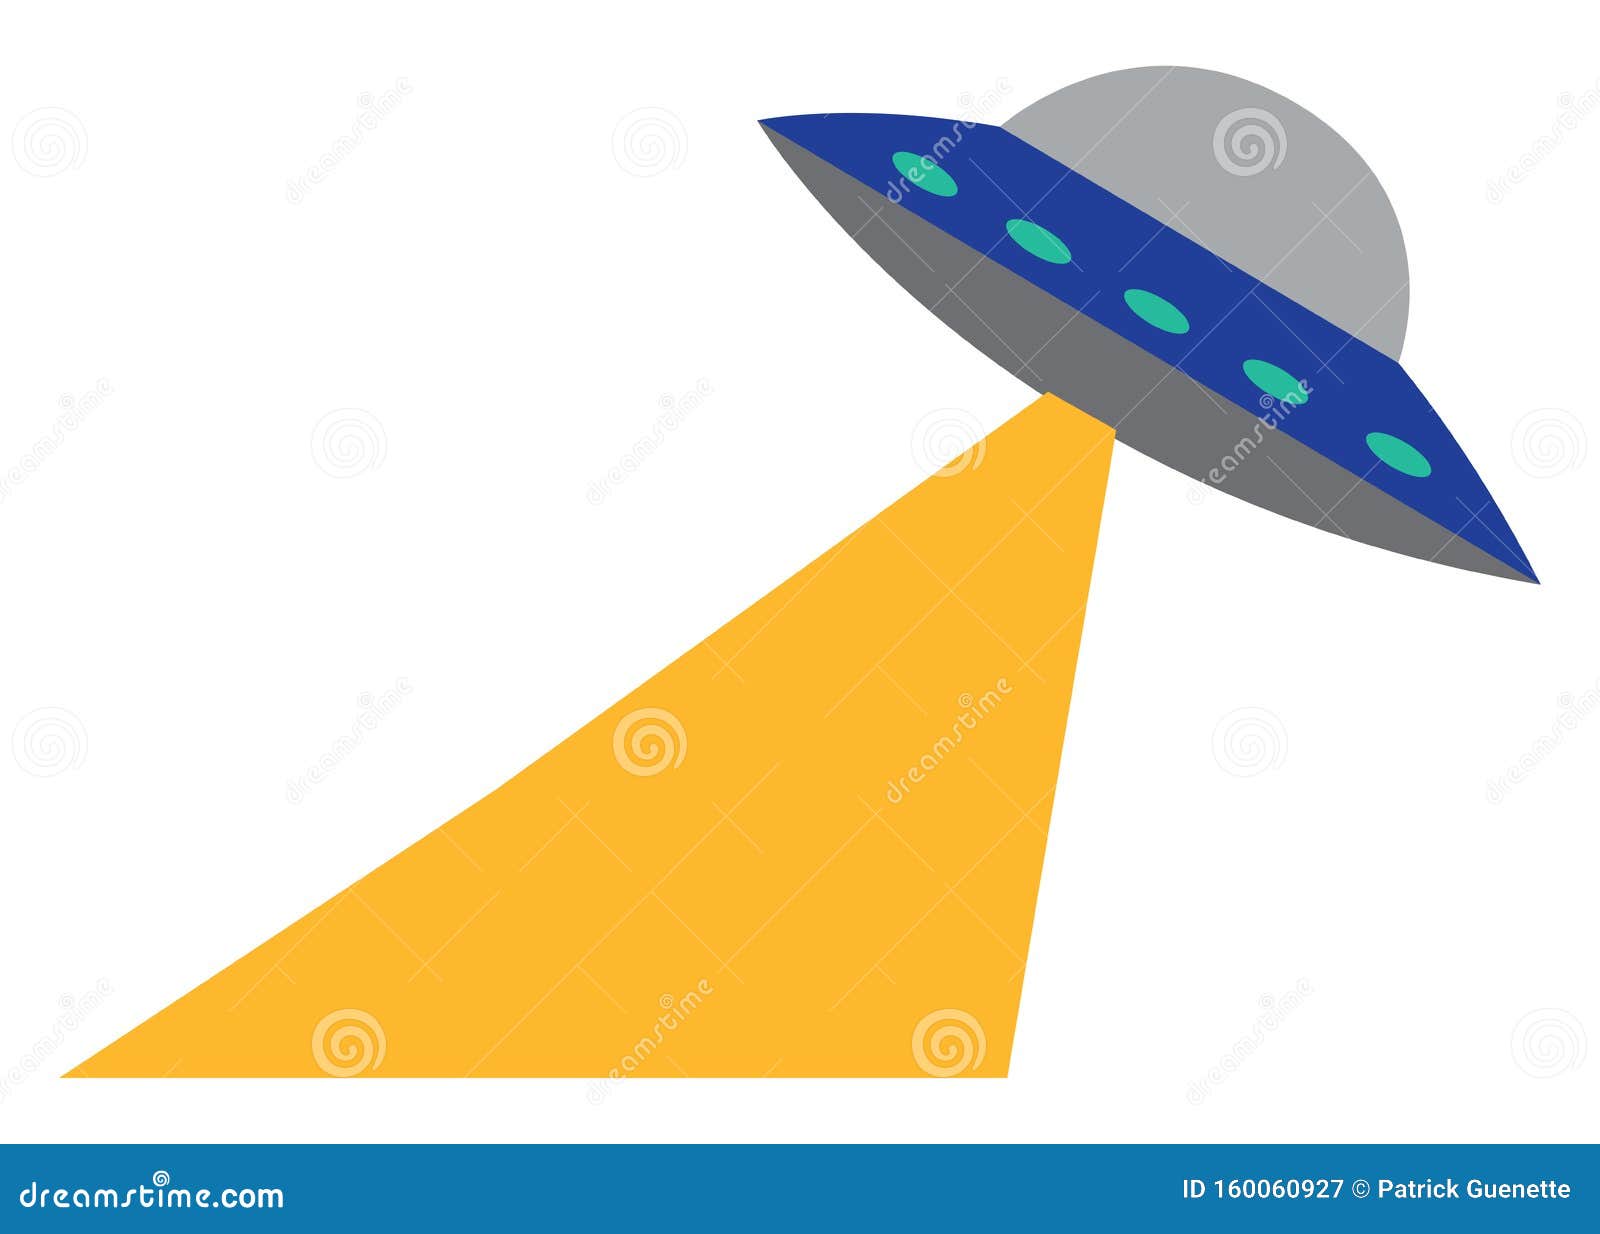 A Round Dome Shaped Alien Spacecraft Known As Ufo Vector Color Drawing Or Illustration Stock Vector Illustration Of Extraterrestrial Invasion